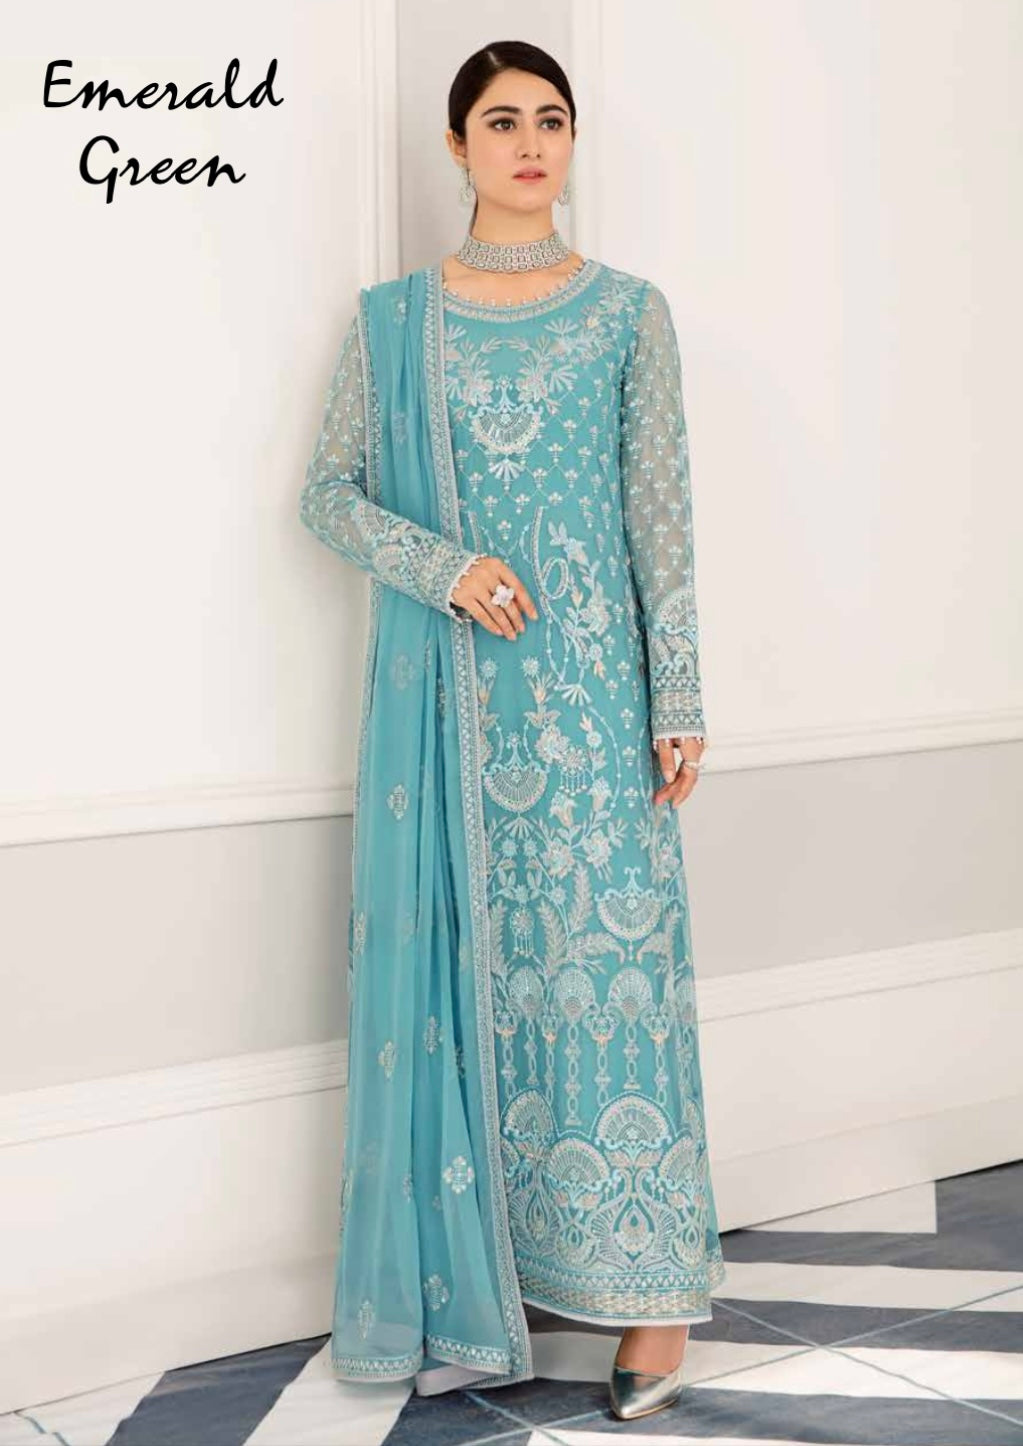 SIMRANS Safeera chiffon embroidered blue coloured suit